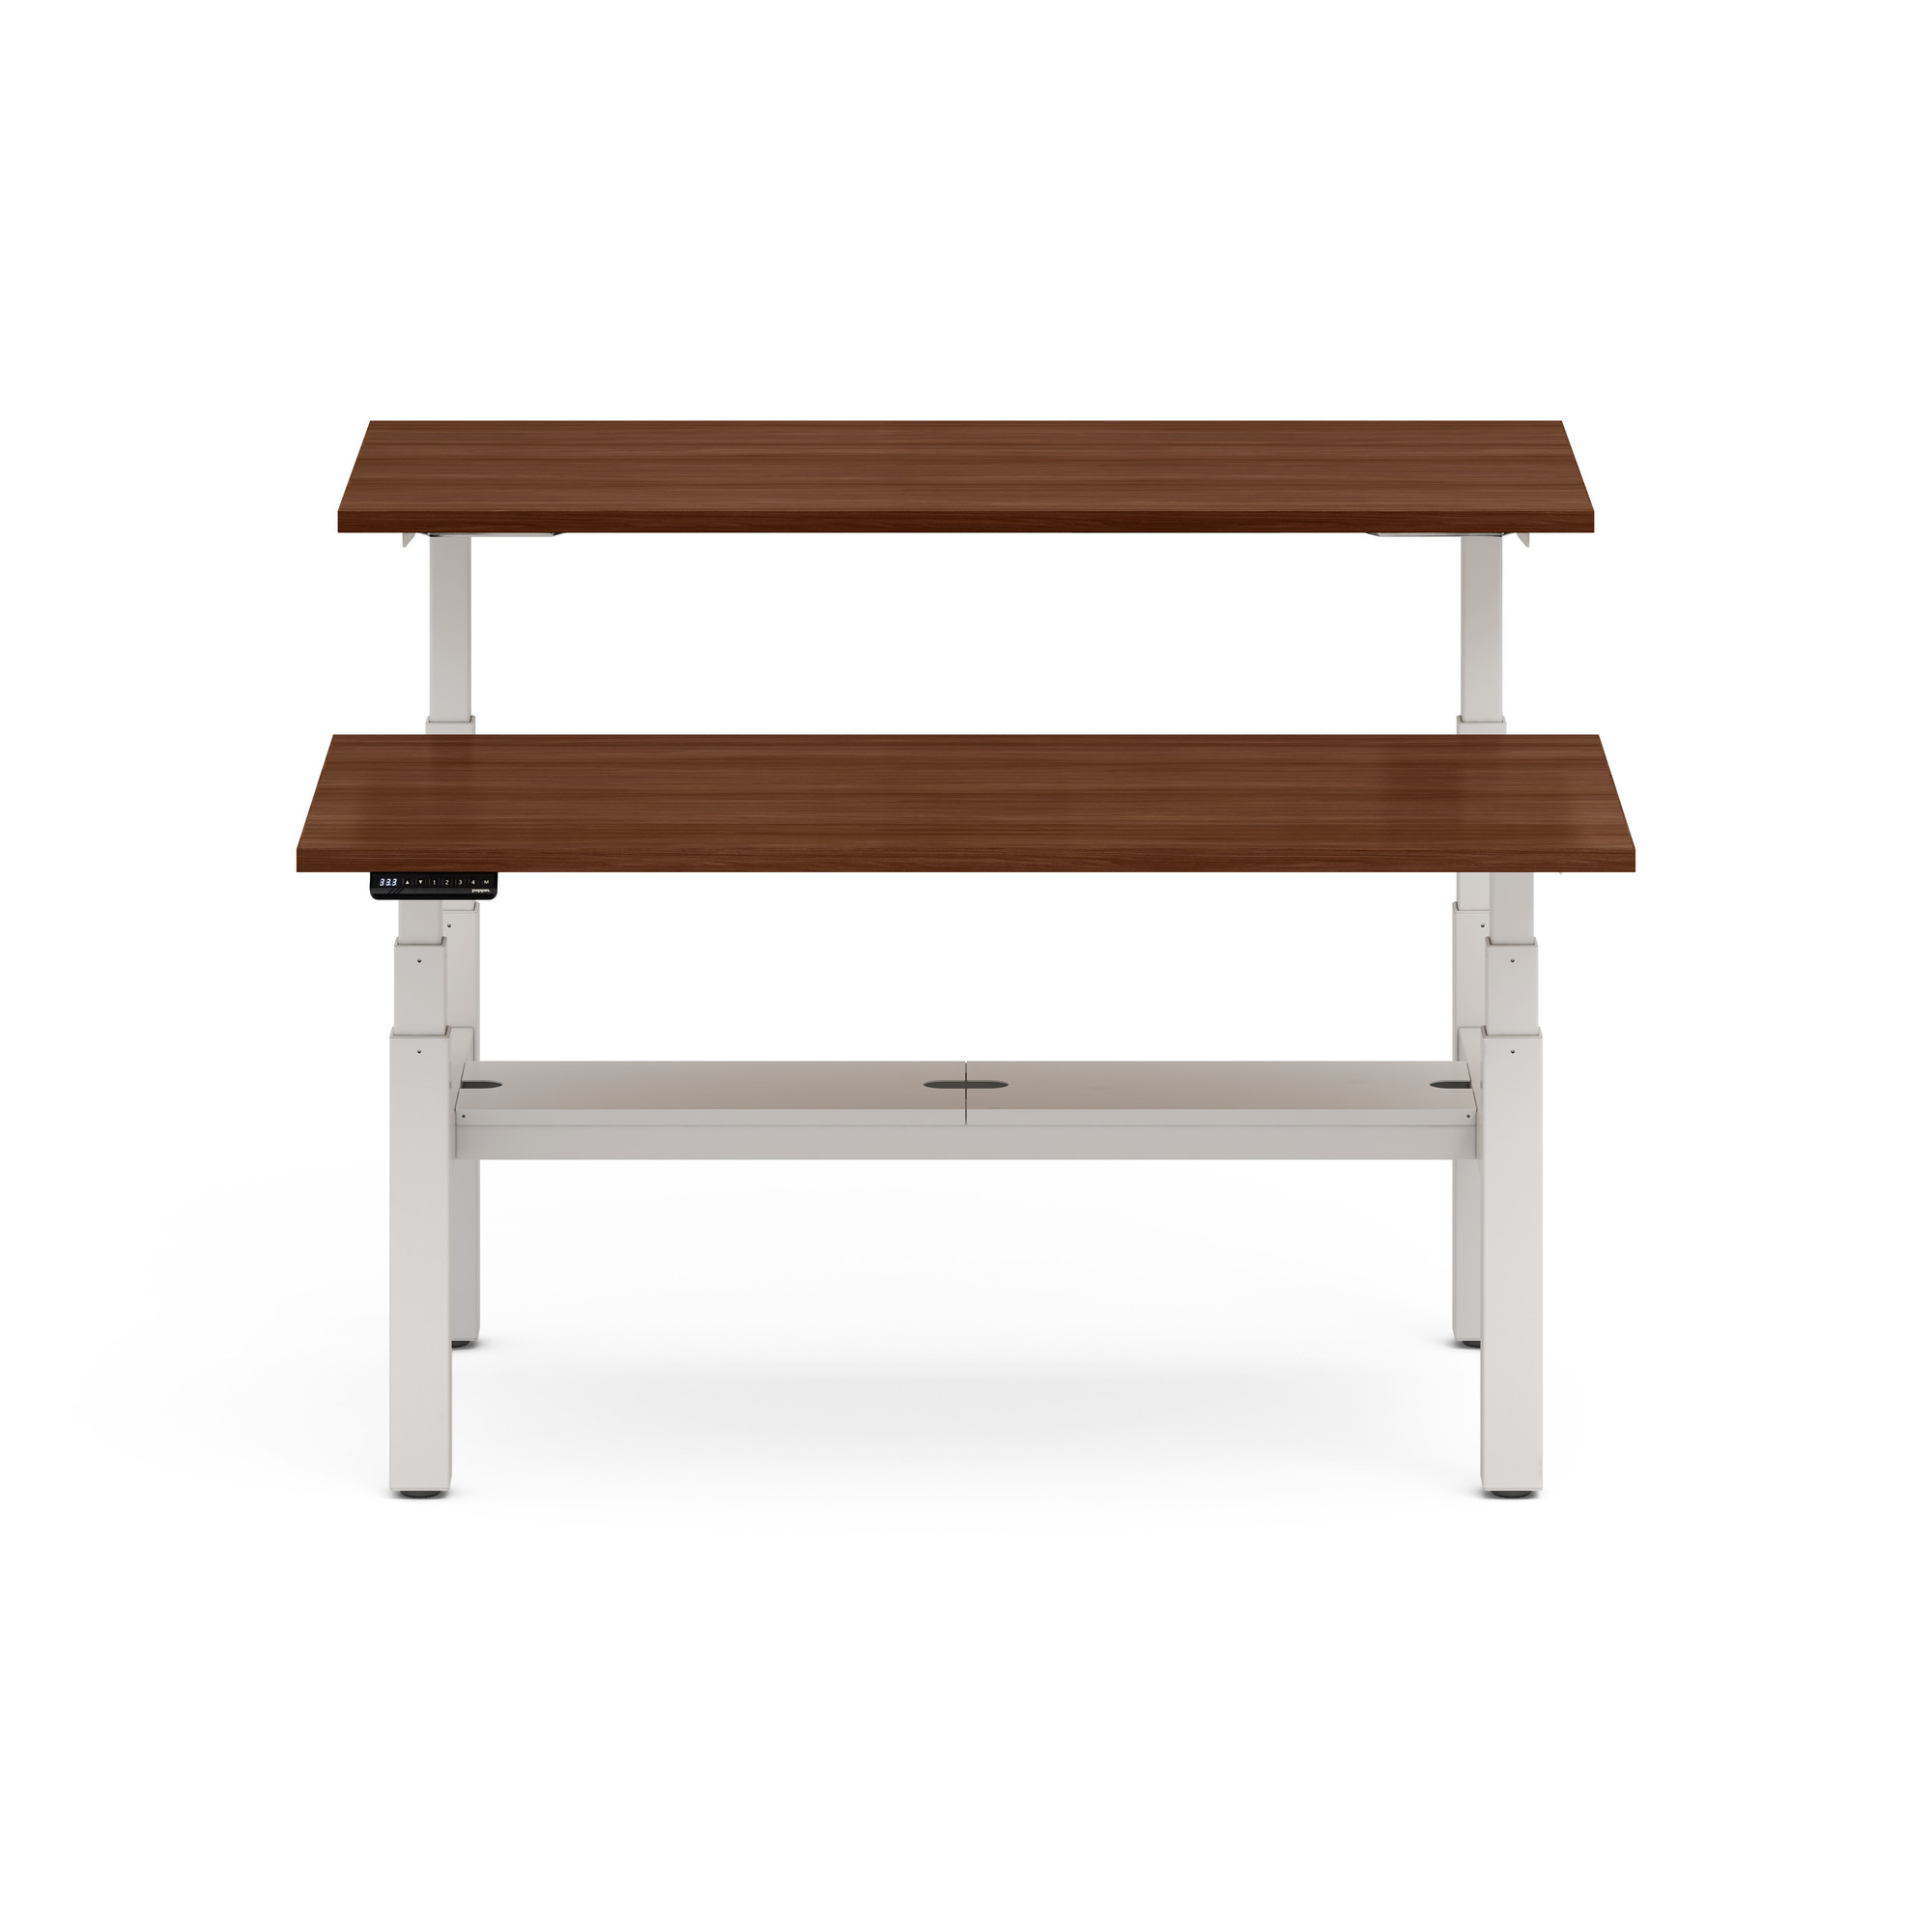 Series L Adjustable Height Double Desk for 2, Walnut, 60", White Legs,Walnut,hi-res